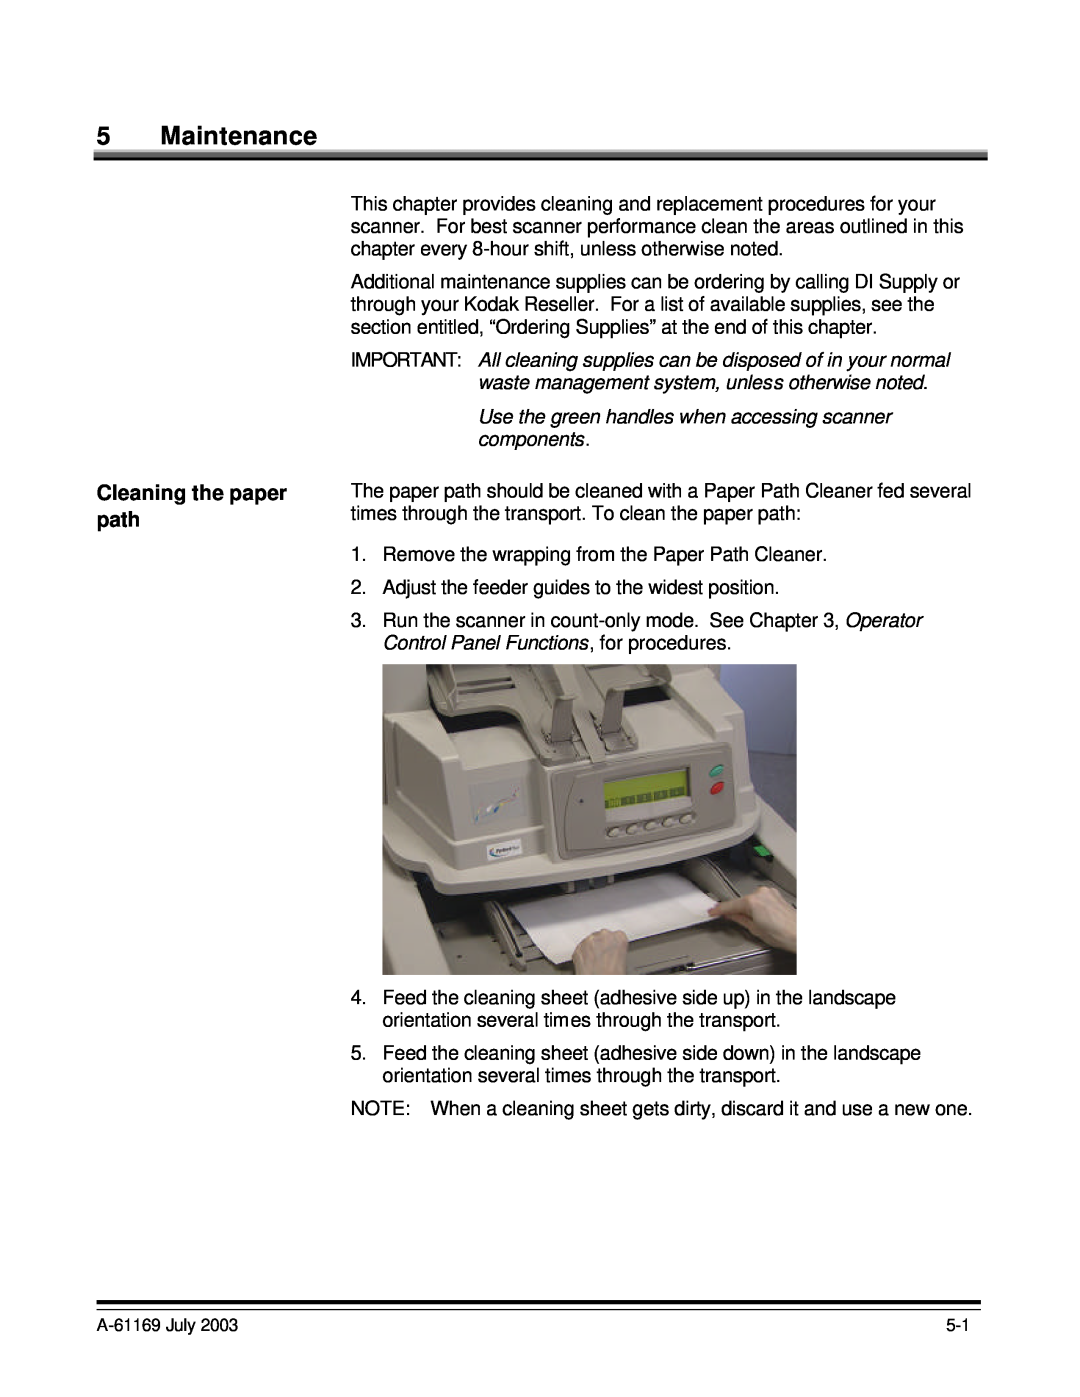 Kodak i800 Series manual Maintenance, Cleaning the paper path, Use the green handles when accessing scanner components 